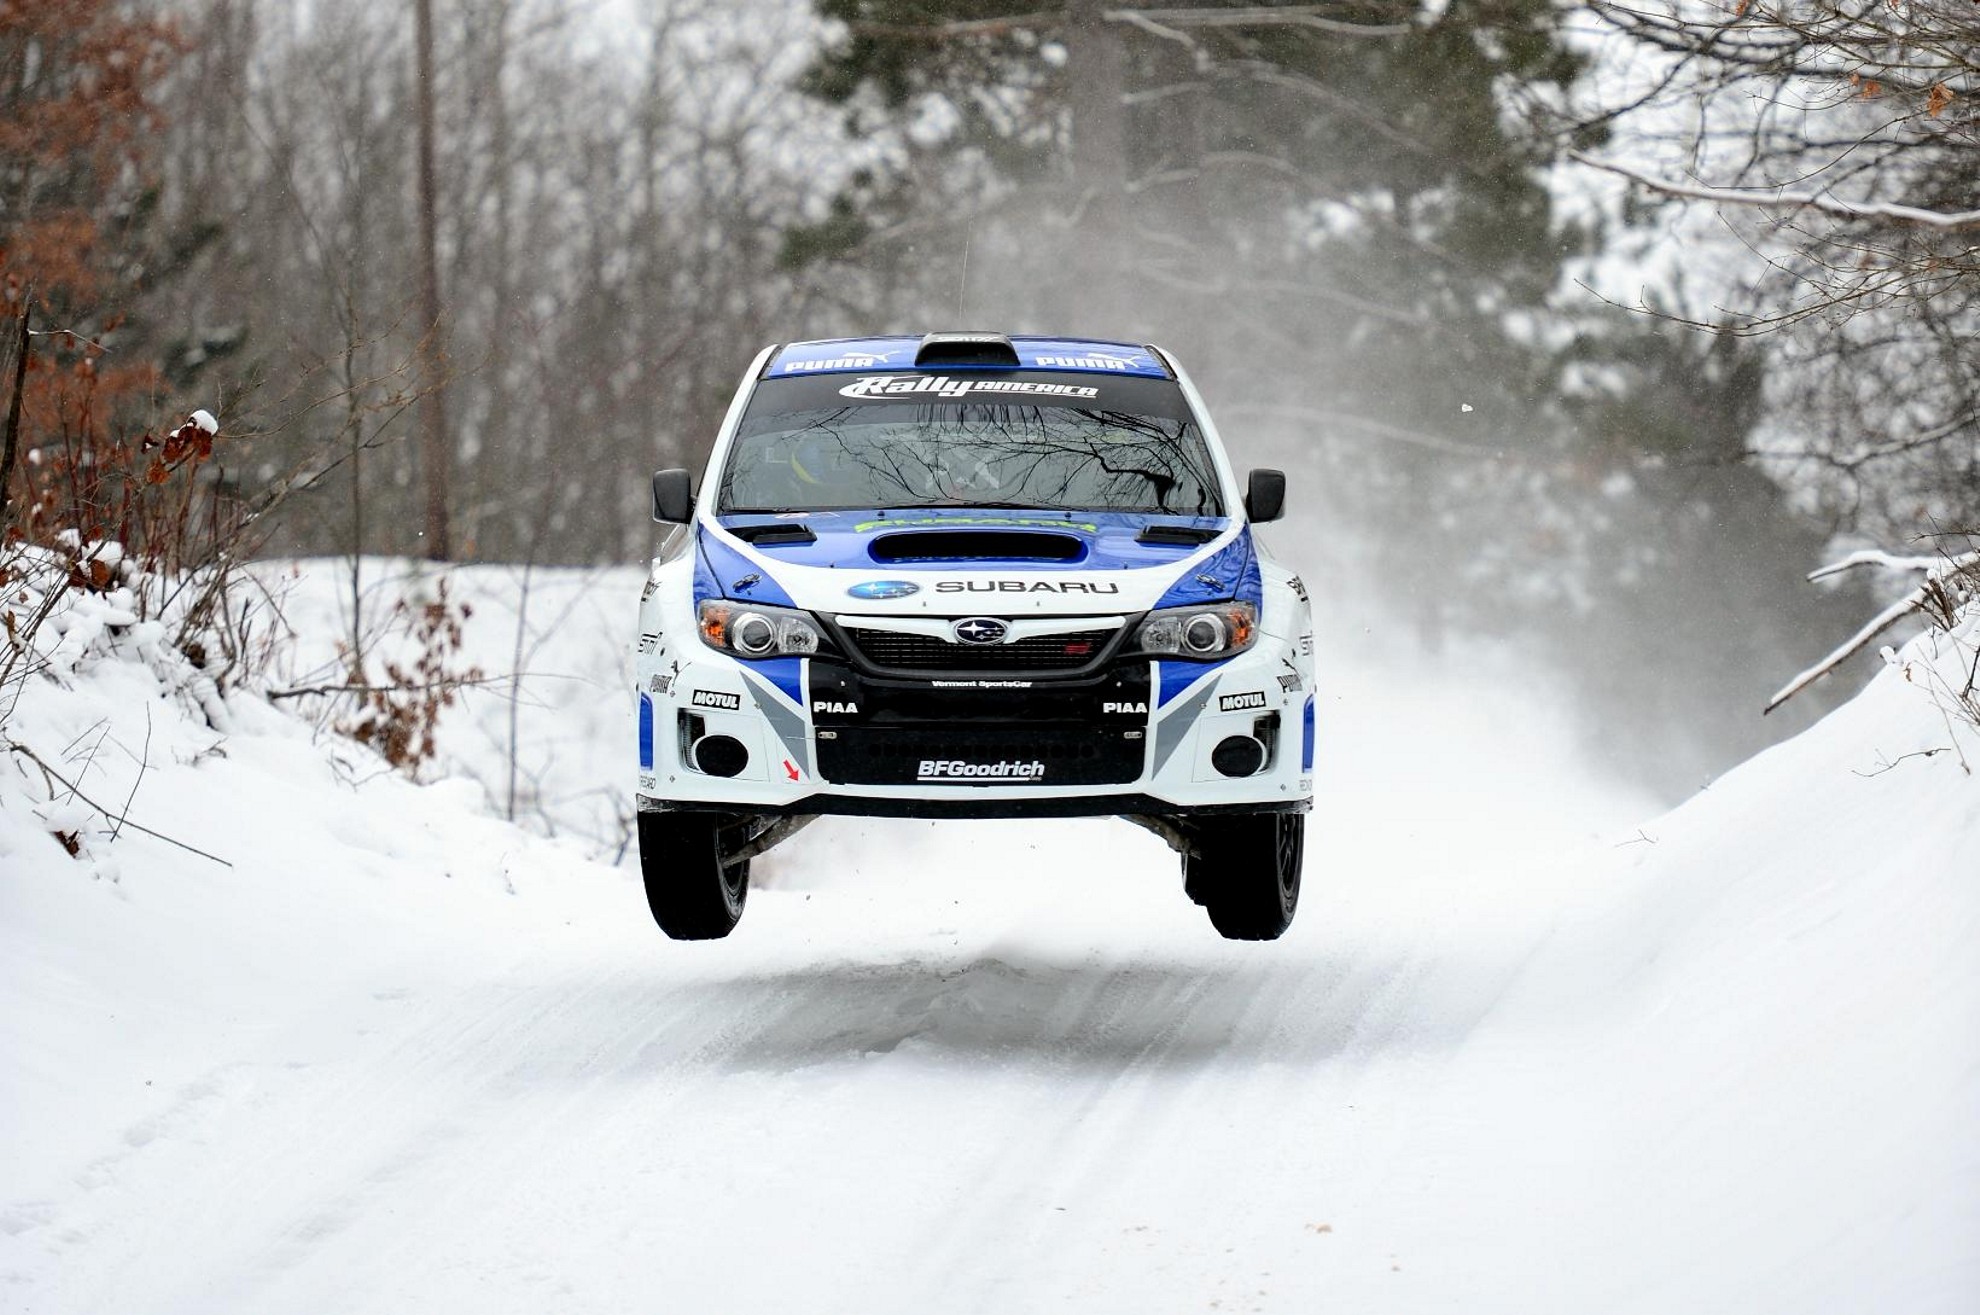 DAVID HIGGINS TAKES 2ND OVERALL IN HARD-FOUGHT SNO DRIFT RALLY